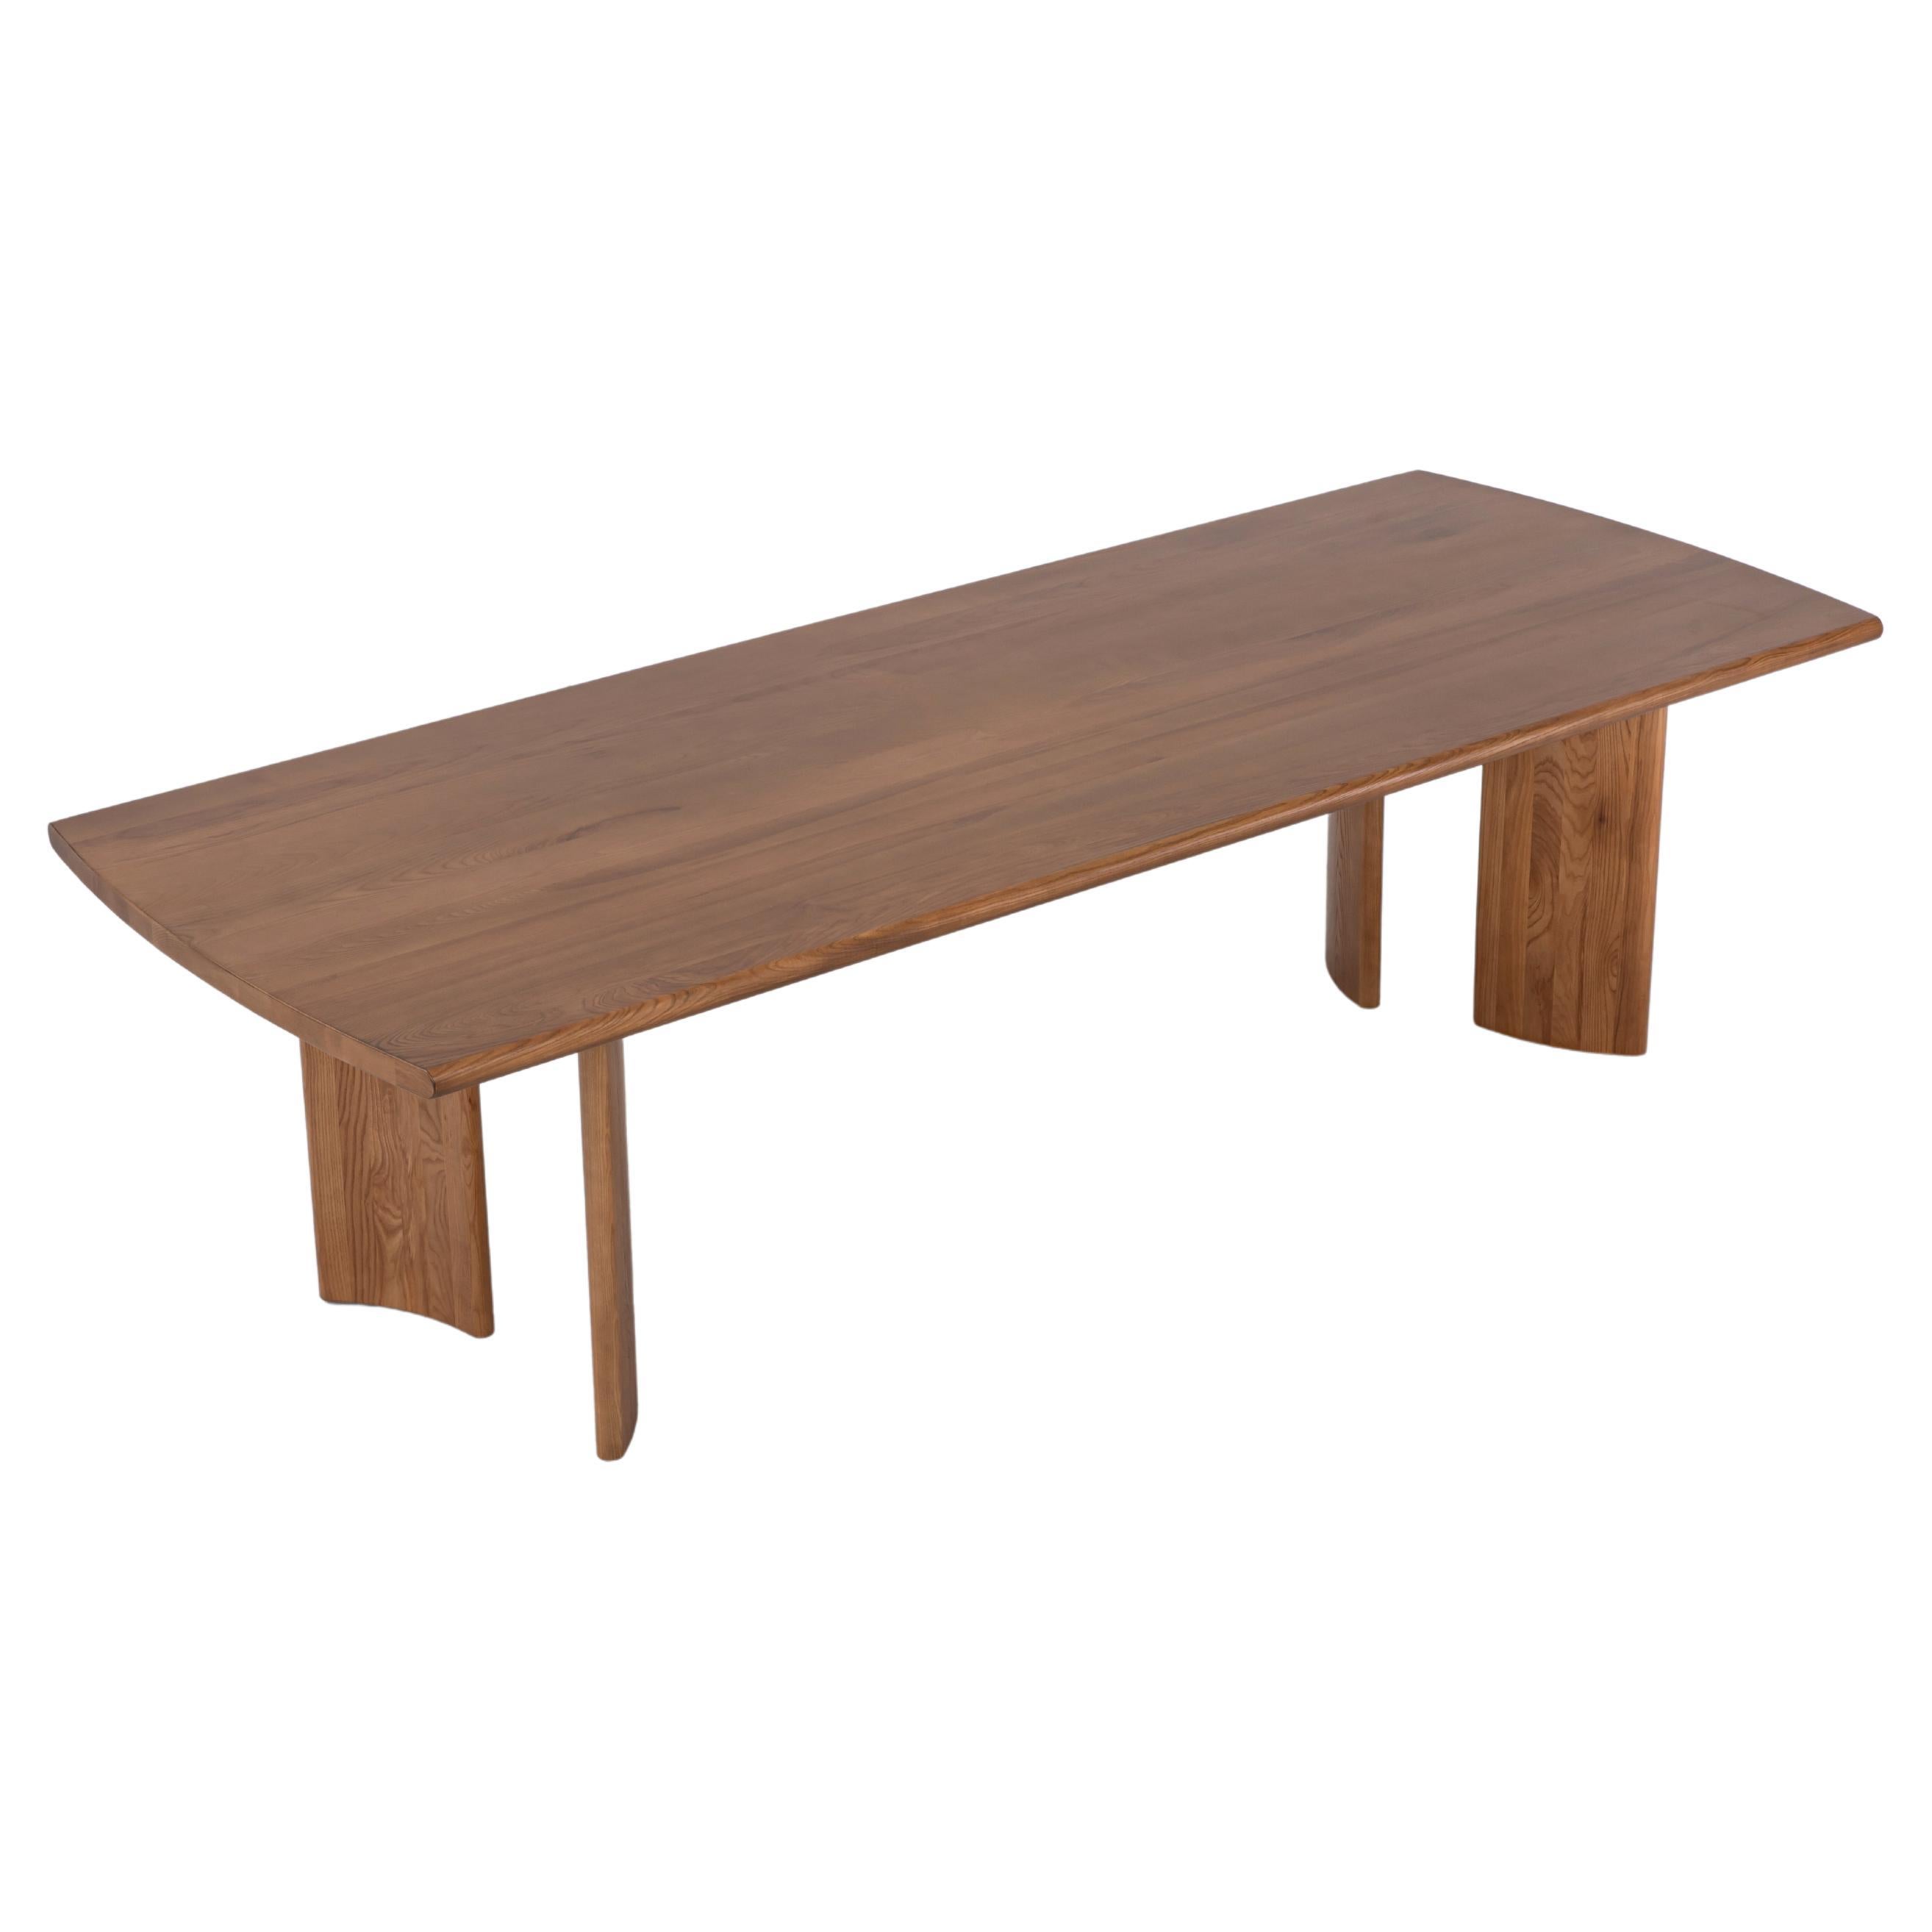 Crest Table 108" in Sienna, Minimalist Dining Table in FSC White Ash Wood